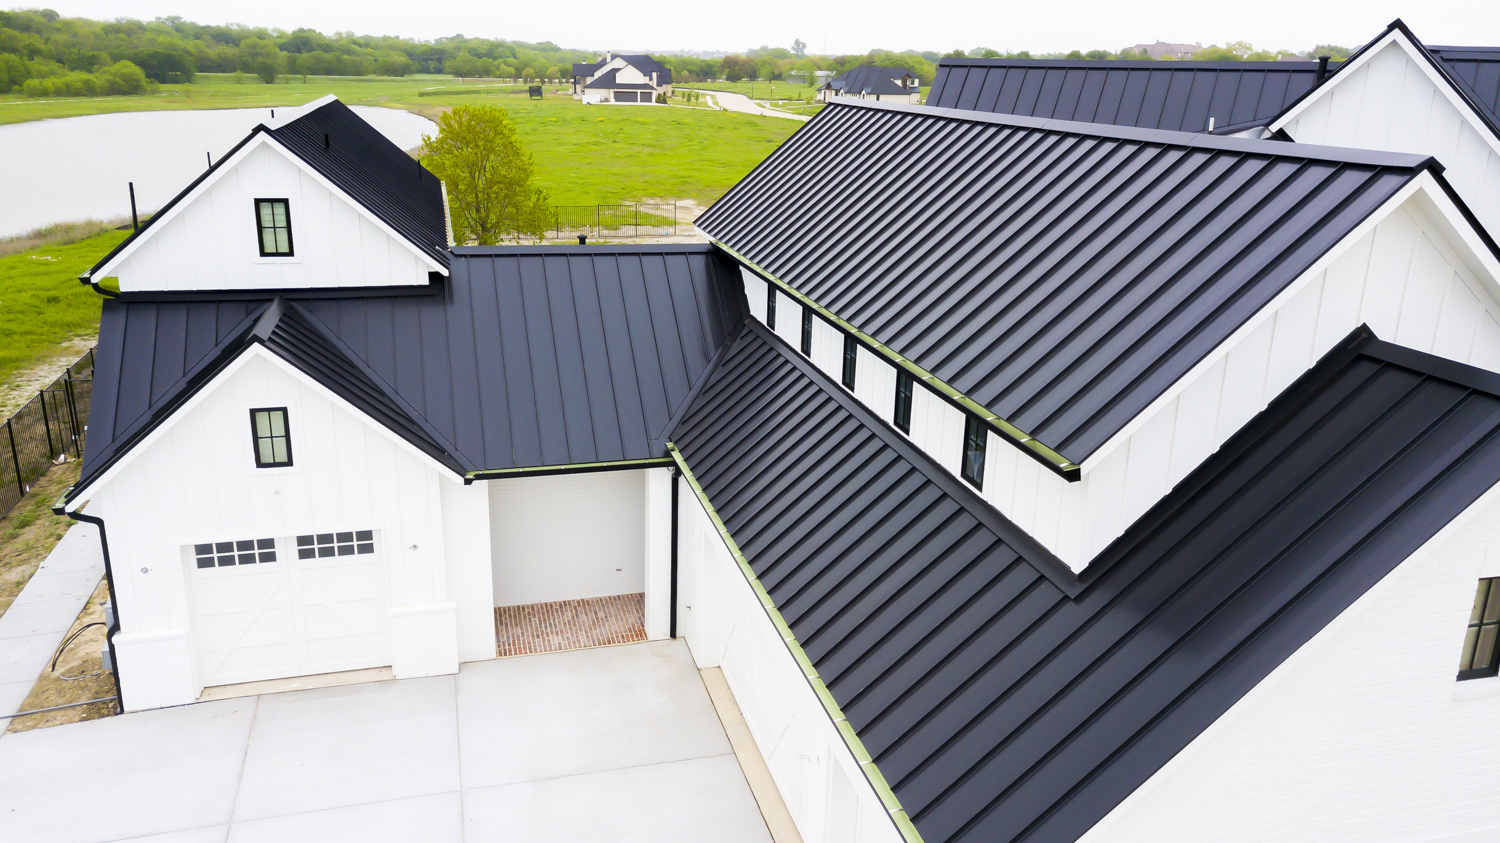 IRONGATE ROOFING & SHEET METAL | NORTH TEXAS METAL ROOFING COMPANY |  (214) 843-1156